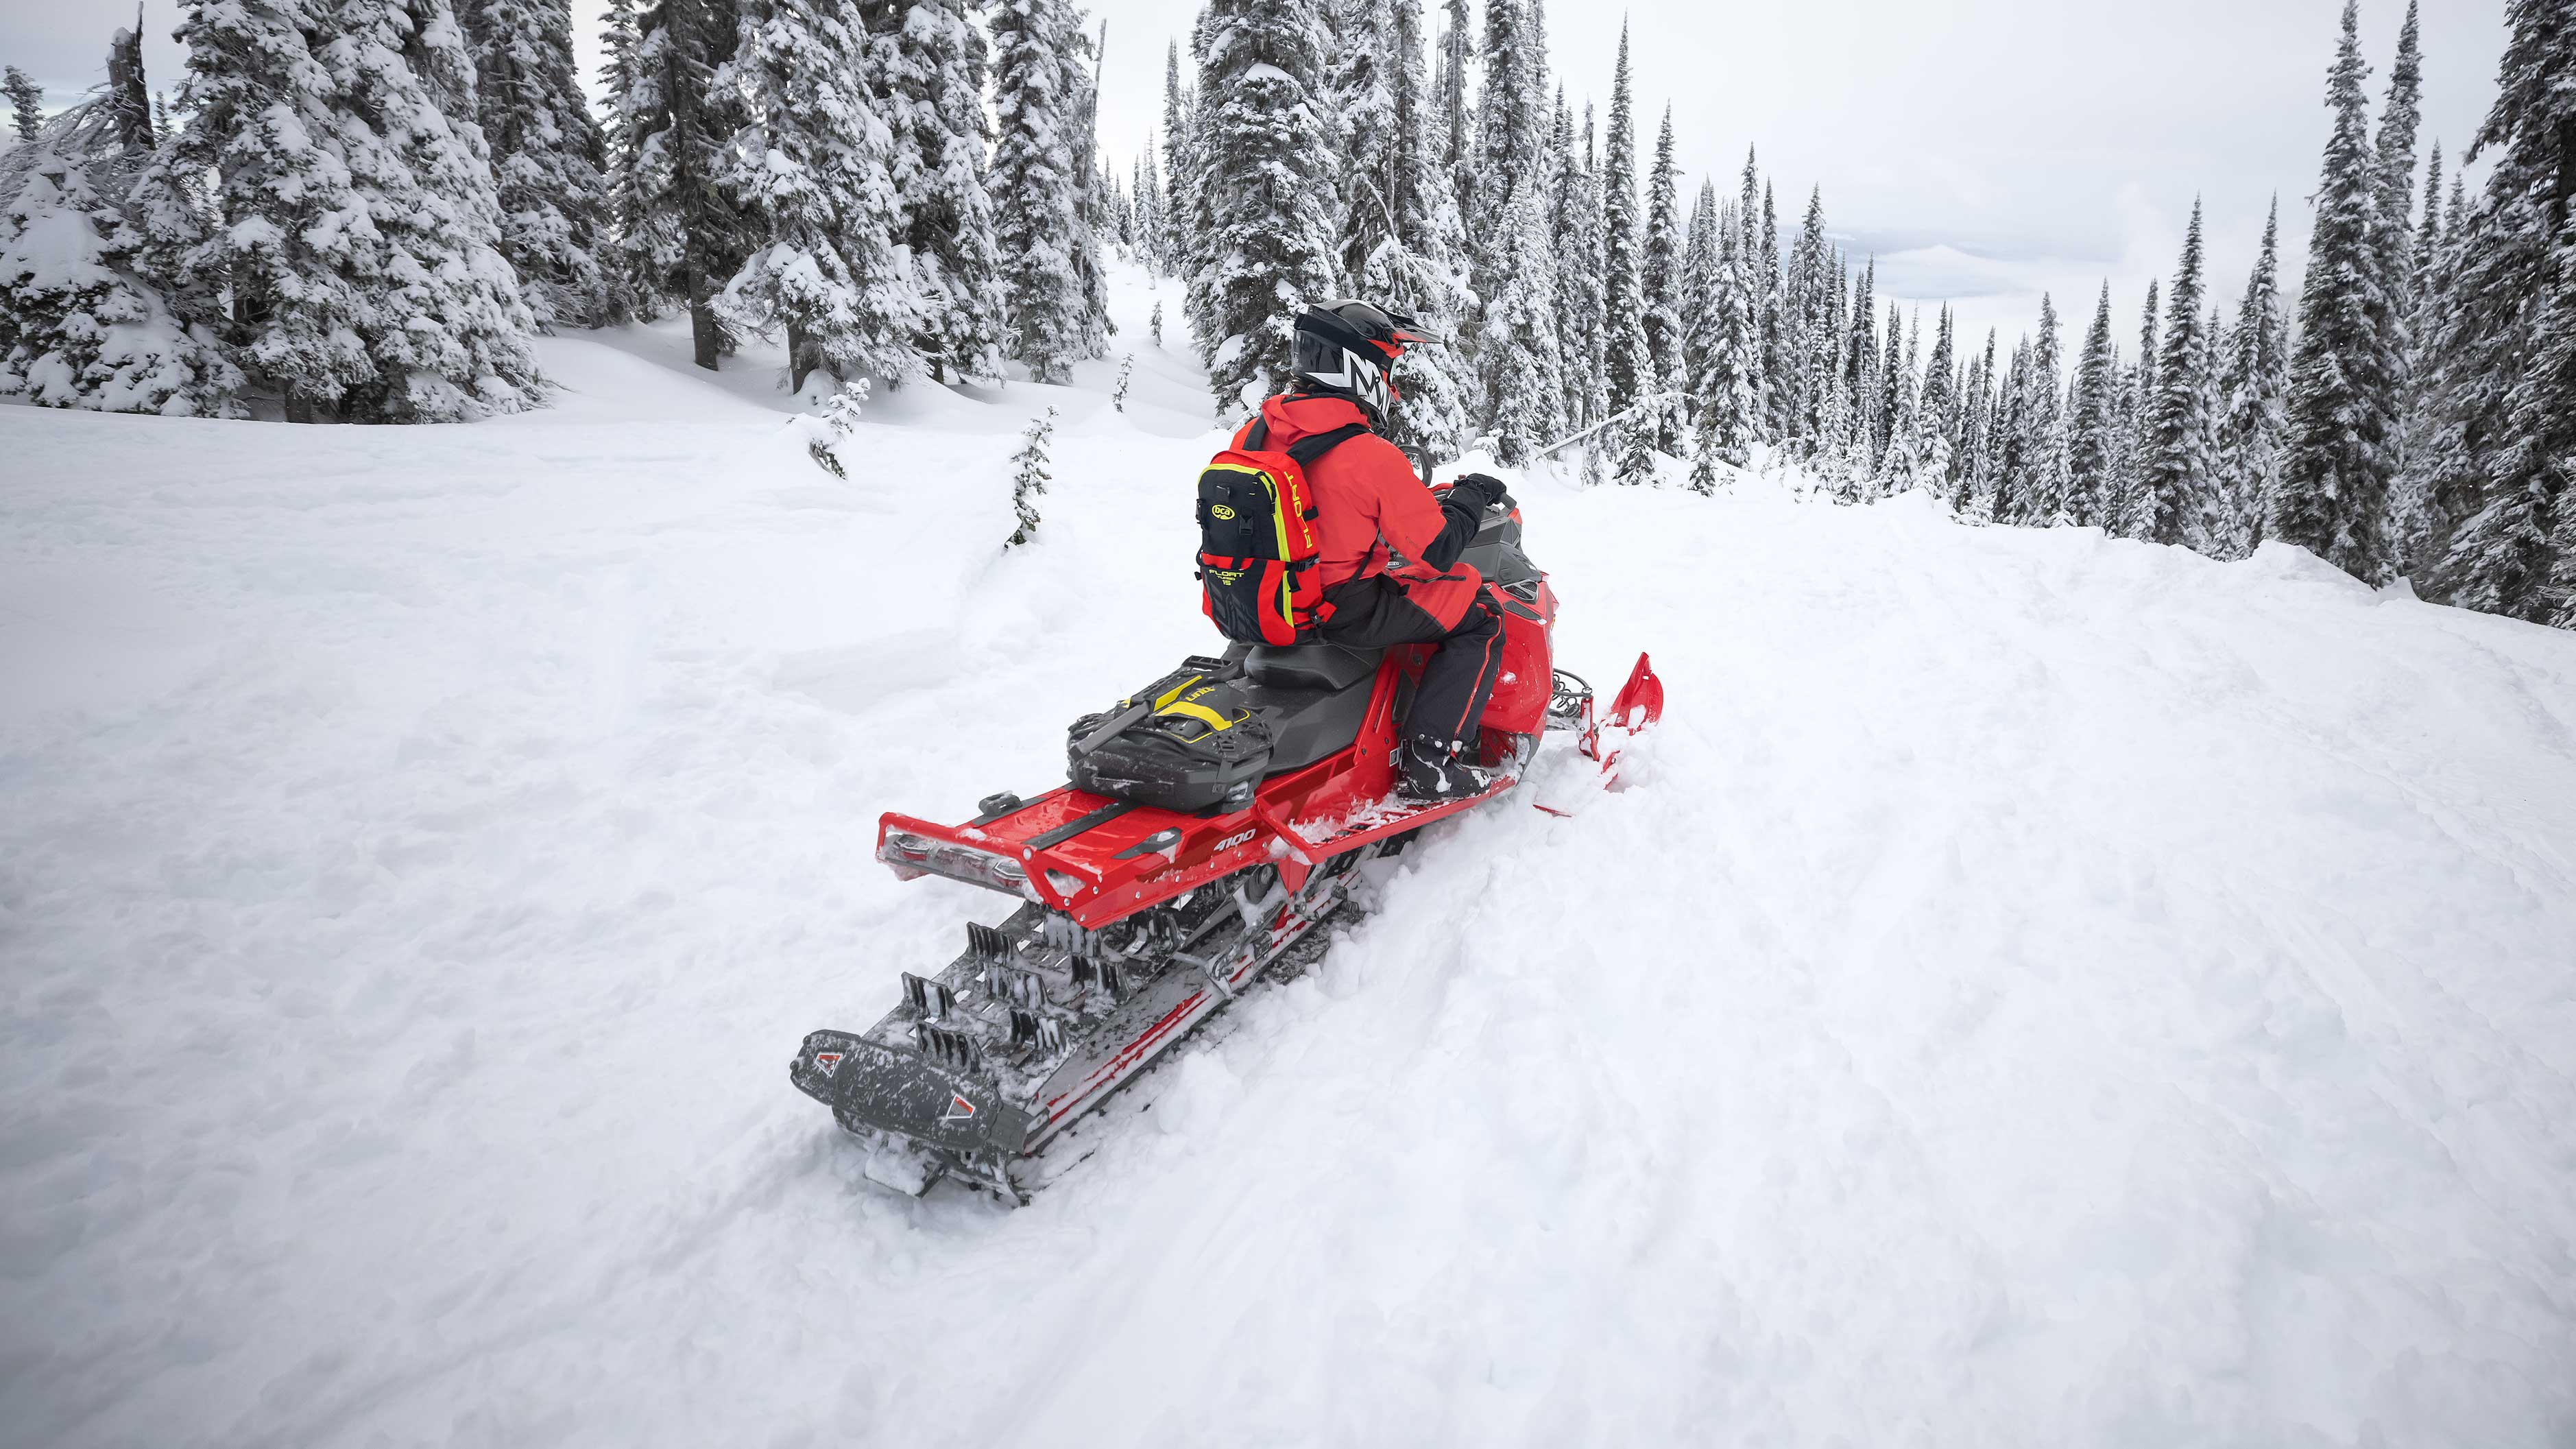 Man well equiped on a red Boondocker in a snowy forest